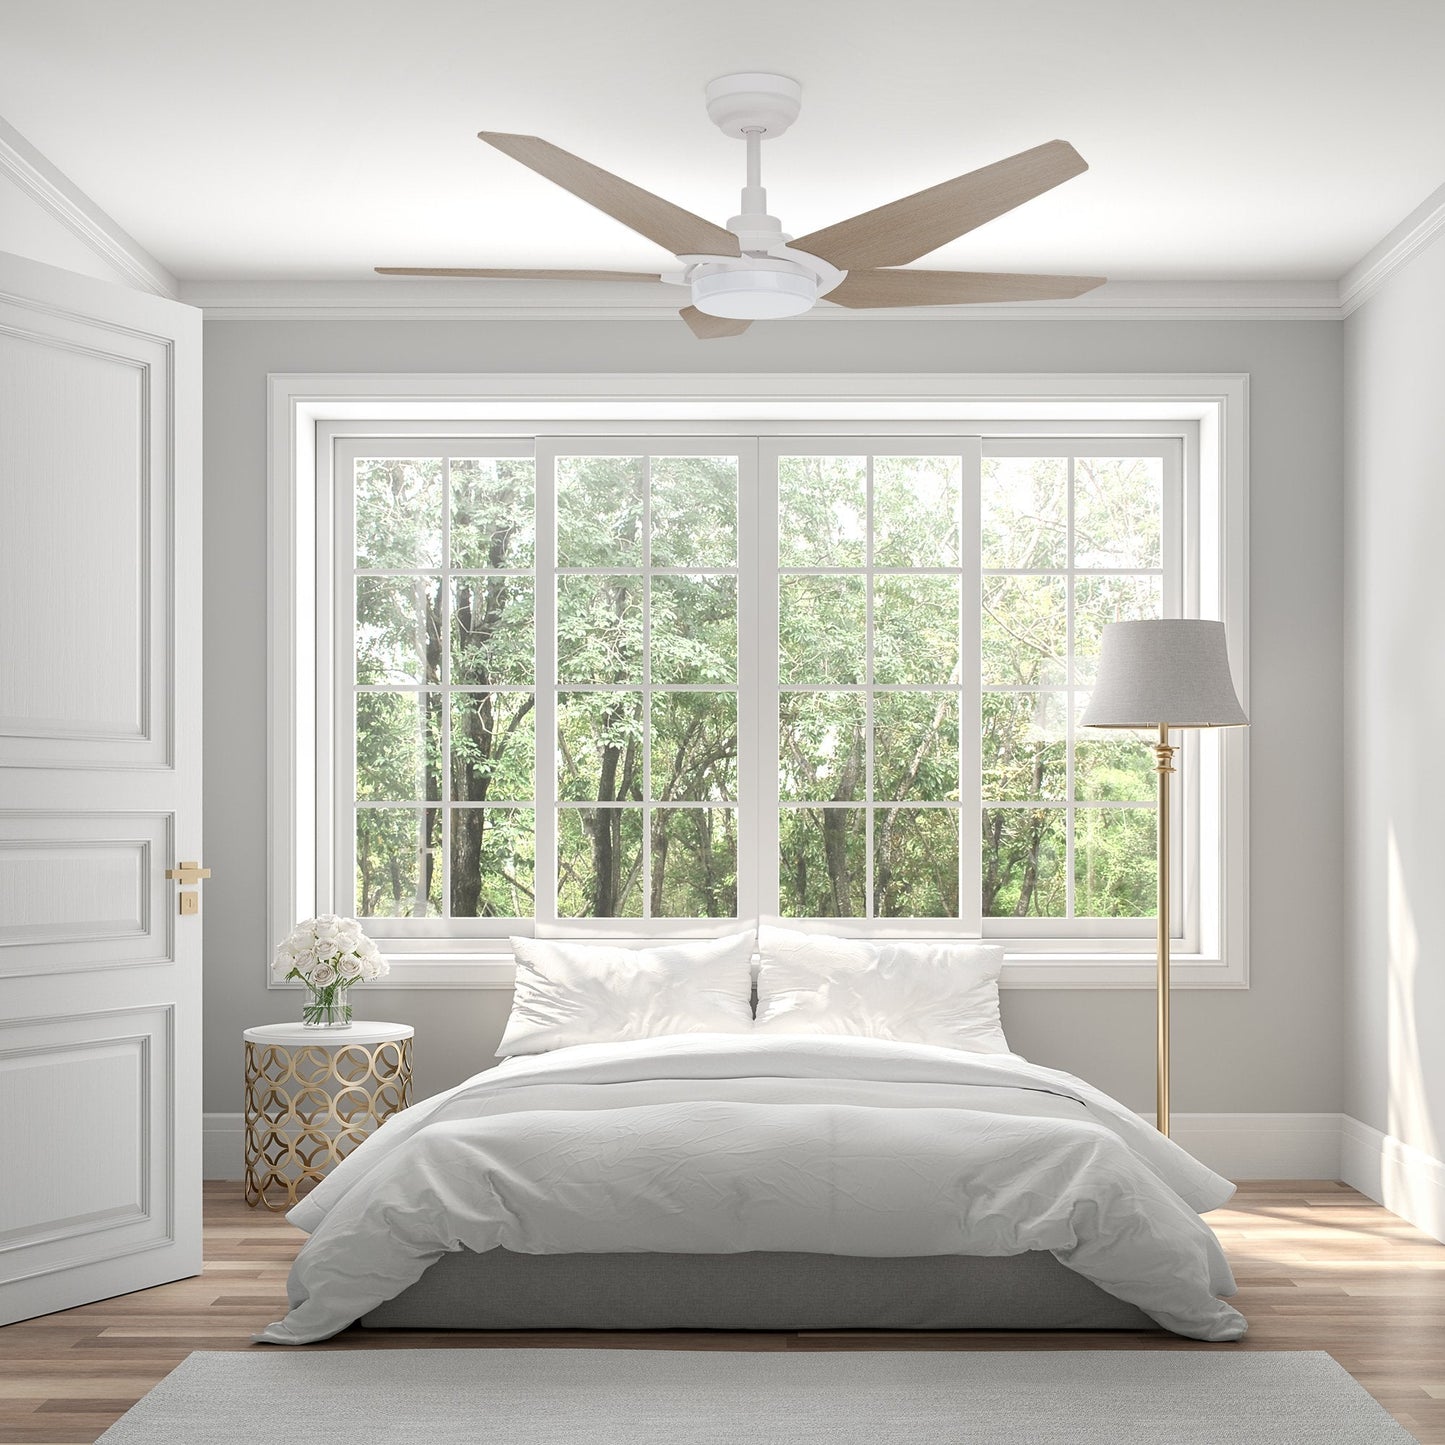 Voyager 52'' Best Smart Ceiling Fan with Remote, Light Kit Included, Works with Google Assistant and Amazon Alexa